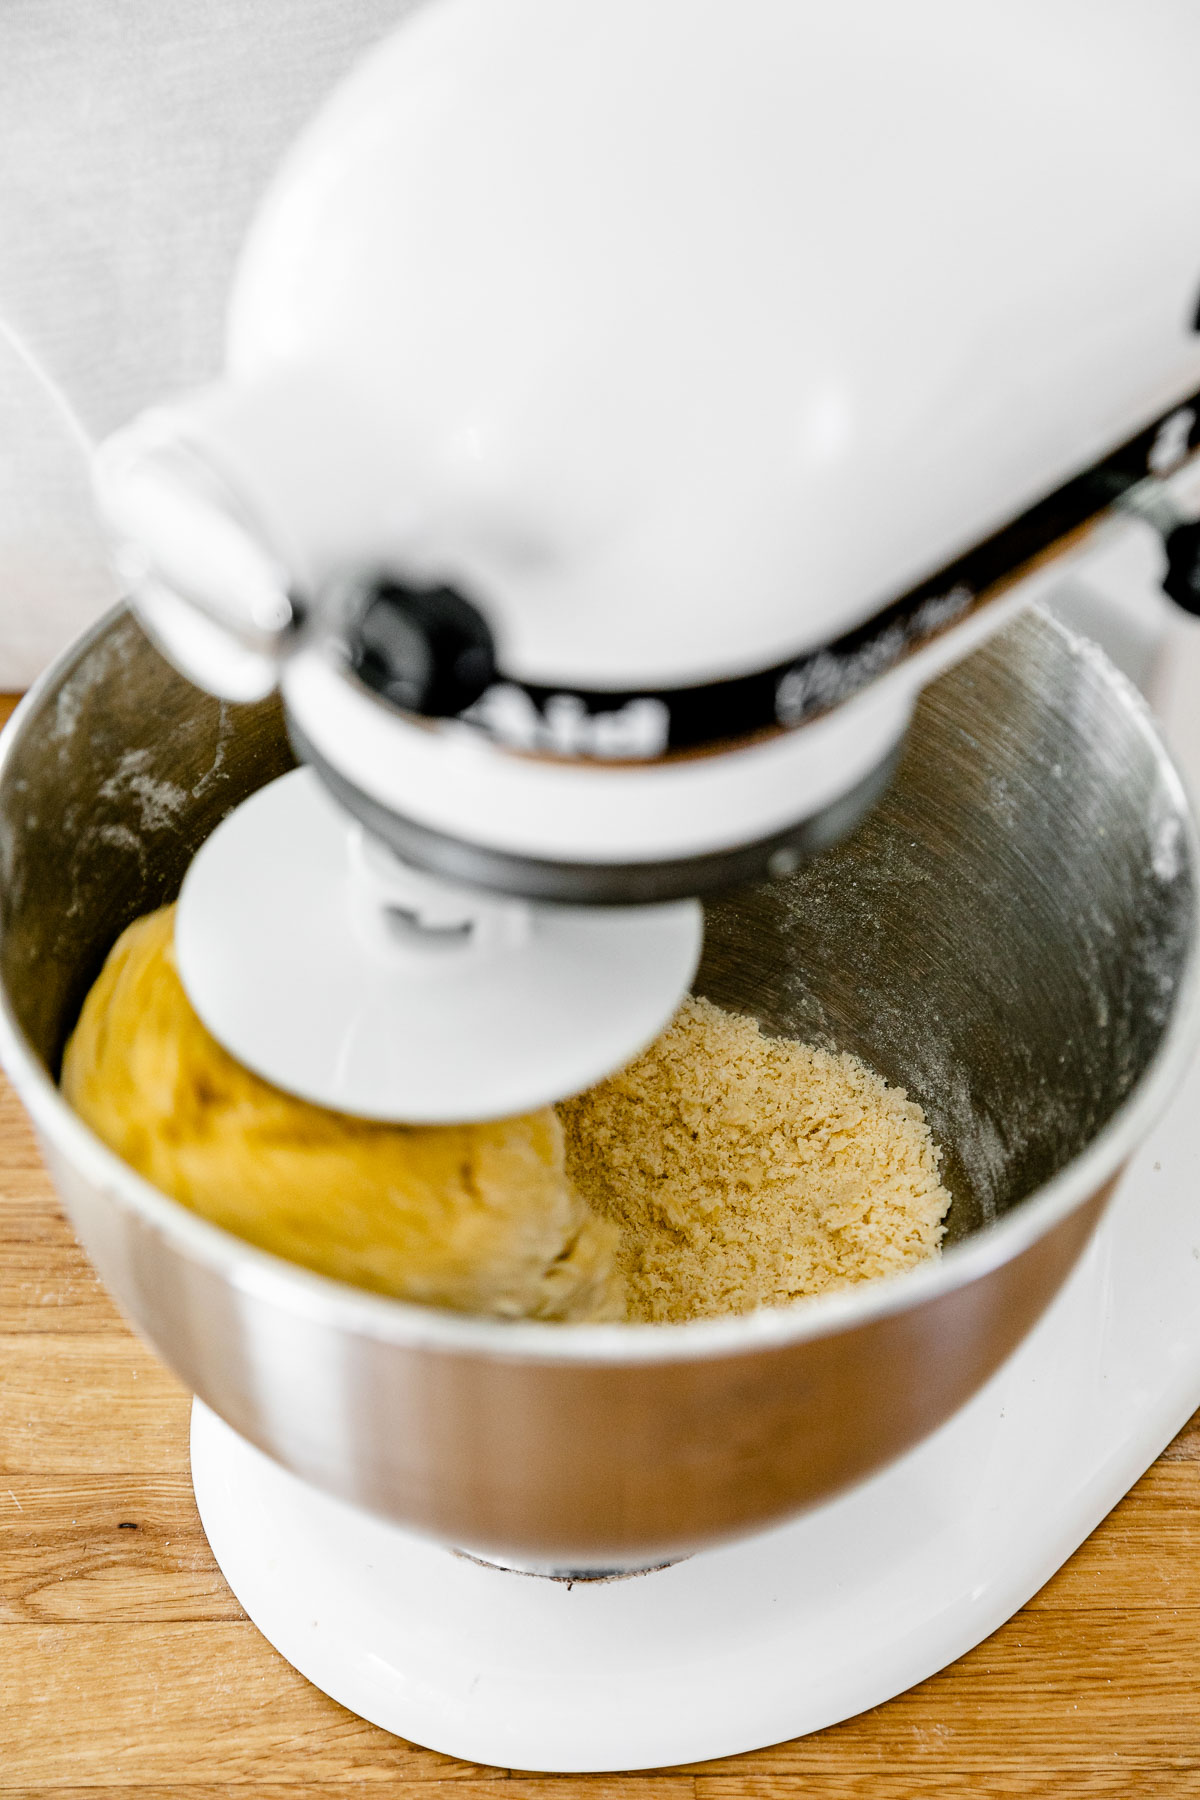 How to Make Fresh Pasta Dough with a Stand Mixer, Step 2: Mix the pasta dough. A KitchenAid Stand Mixer with the dough hook attachment connected is turned on and being used knead fresh pasta dough that is forming within the mixing bowl. The stand mixer rests atop a butcher block countertop.